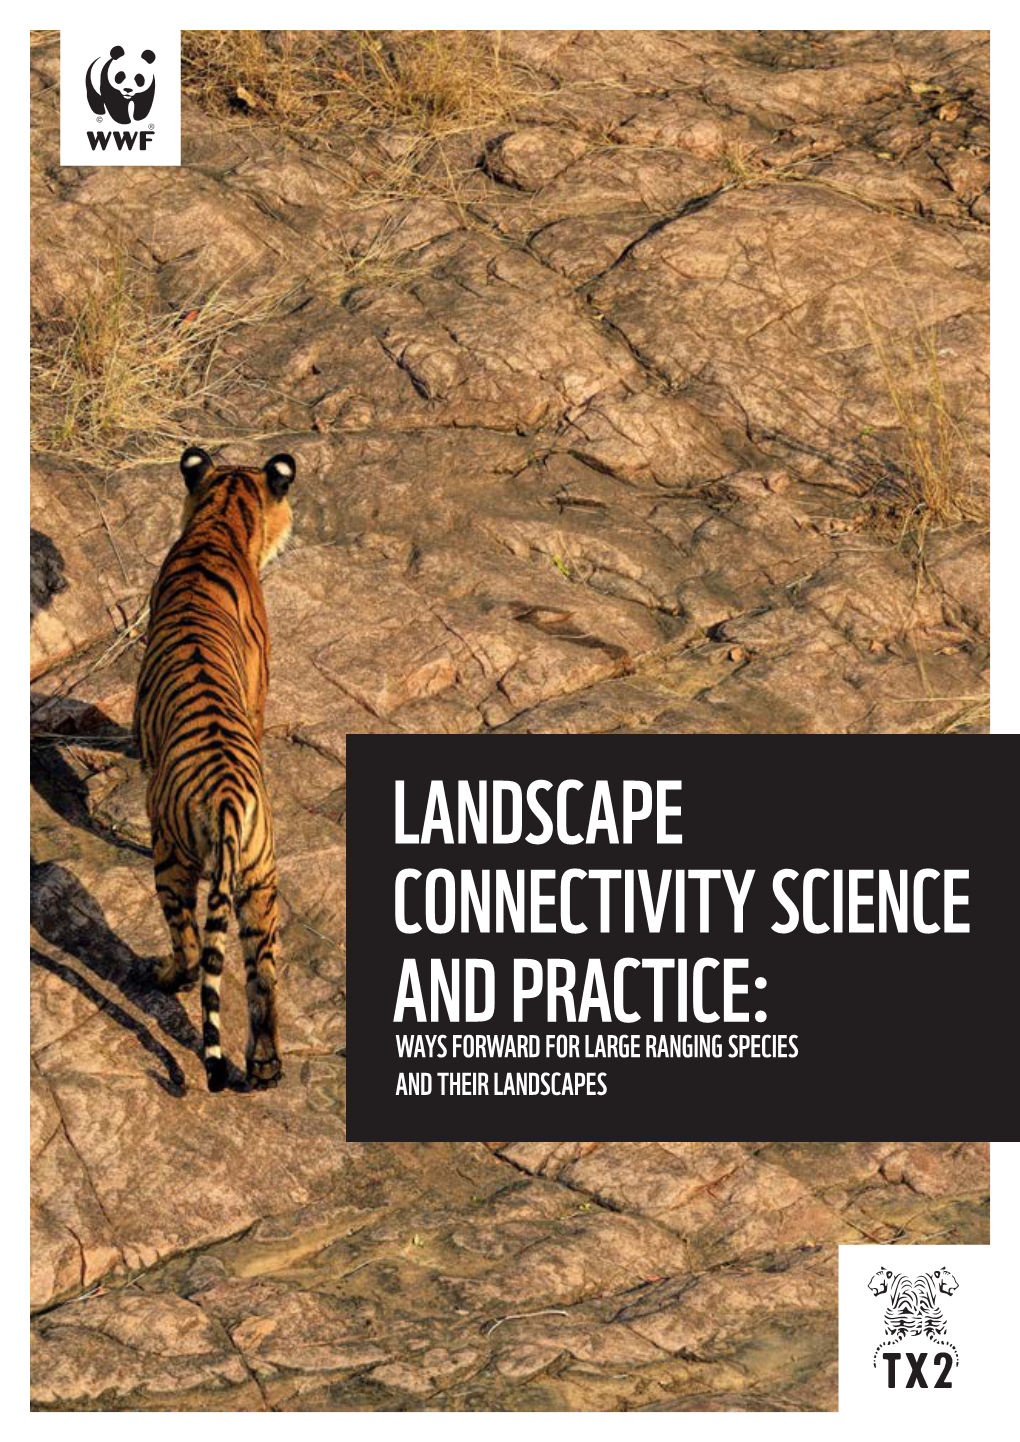 Landscape Connectivity Science and Practice: Ways Forward for Large Ranging Species and Their Landscapes